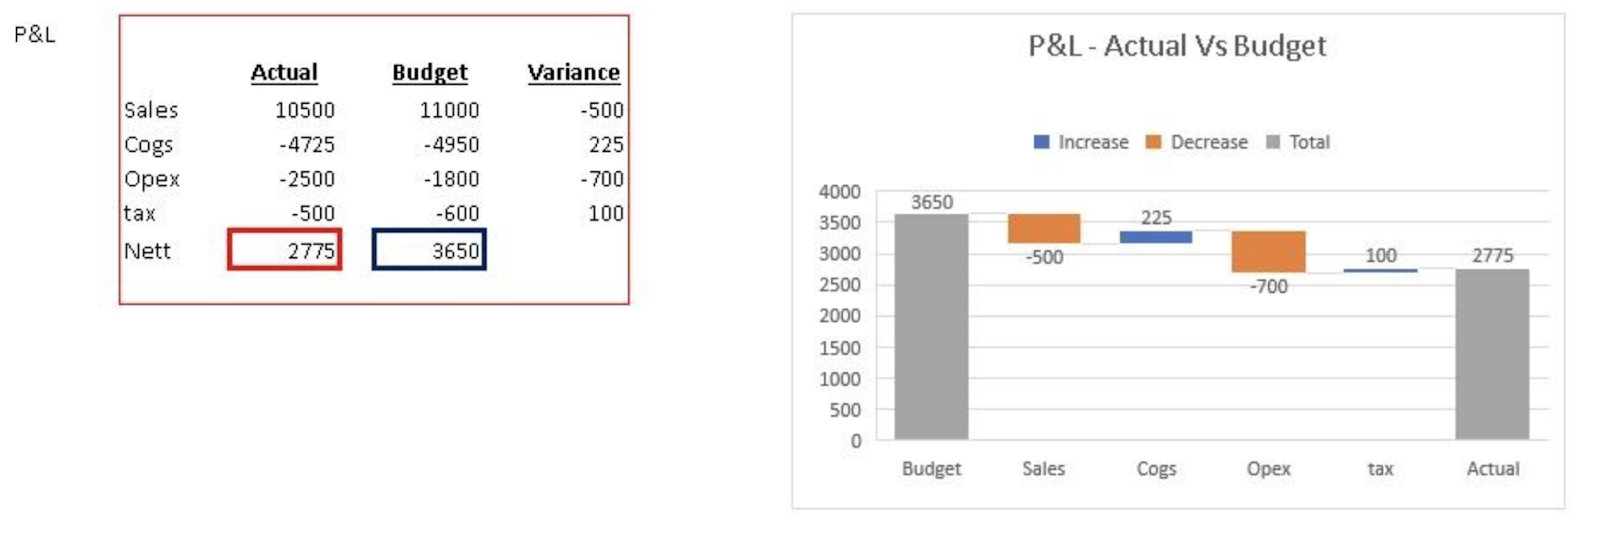 P&L budget vs actuals waterfall chart example